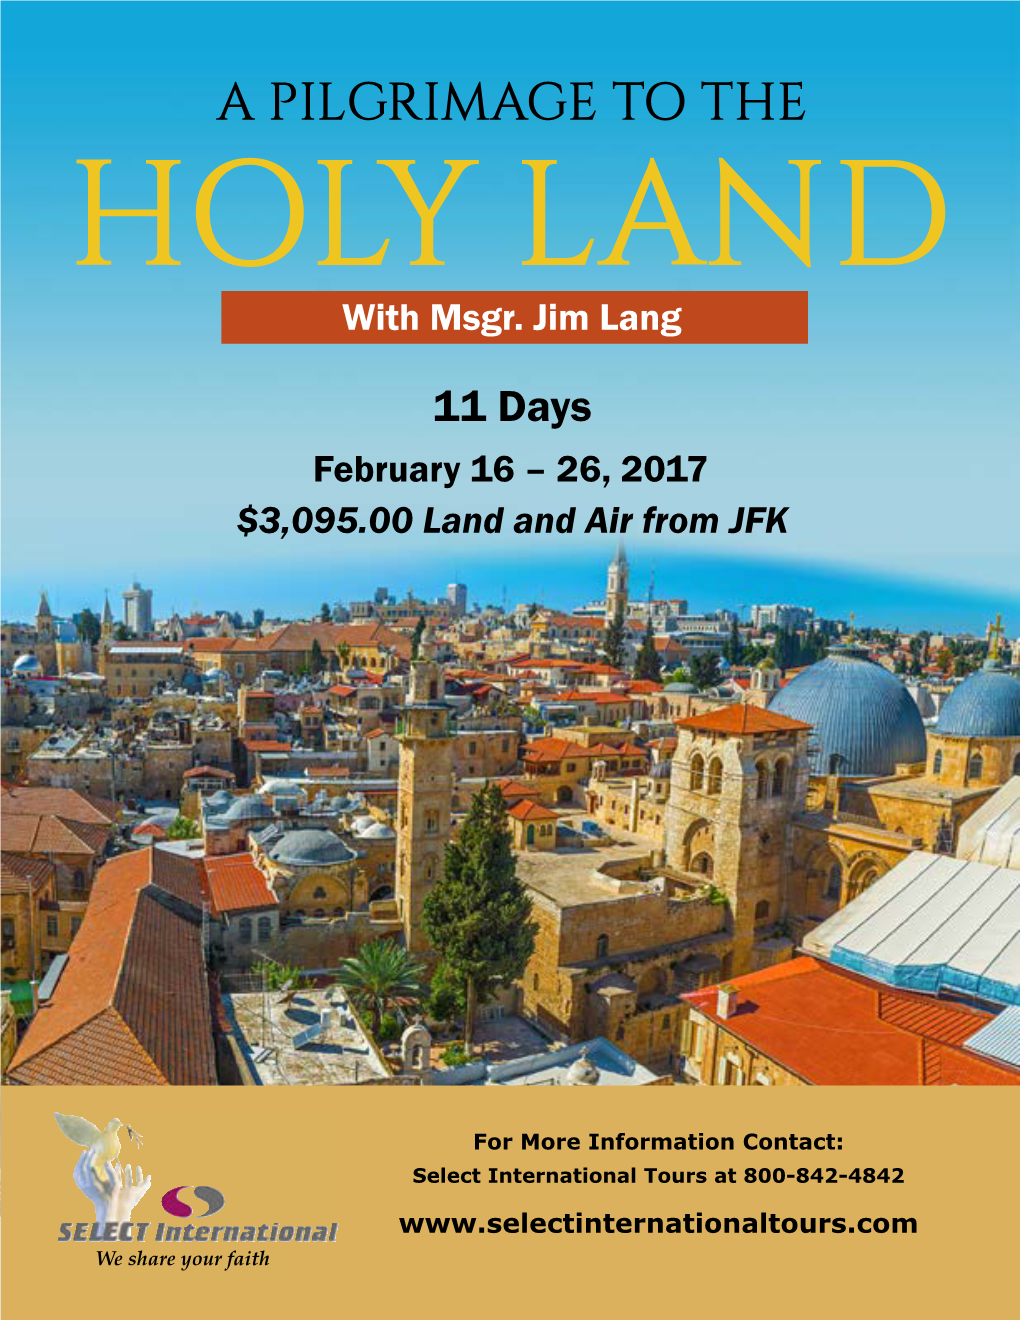 A PILGRIMAGE to the HOLY LAND with Msgr